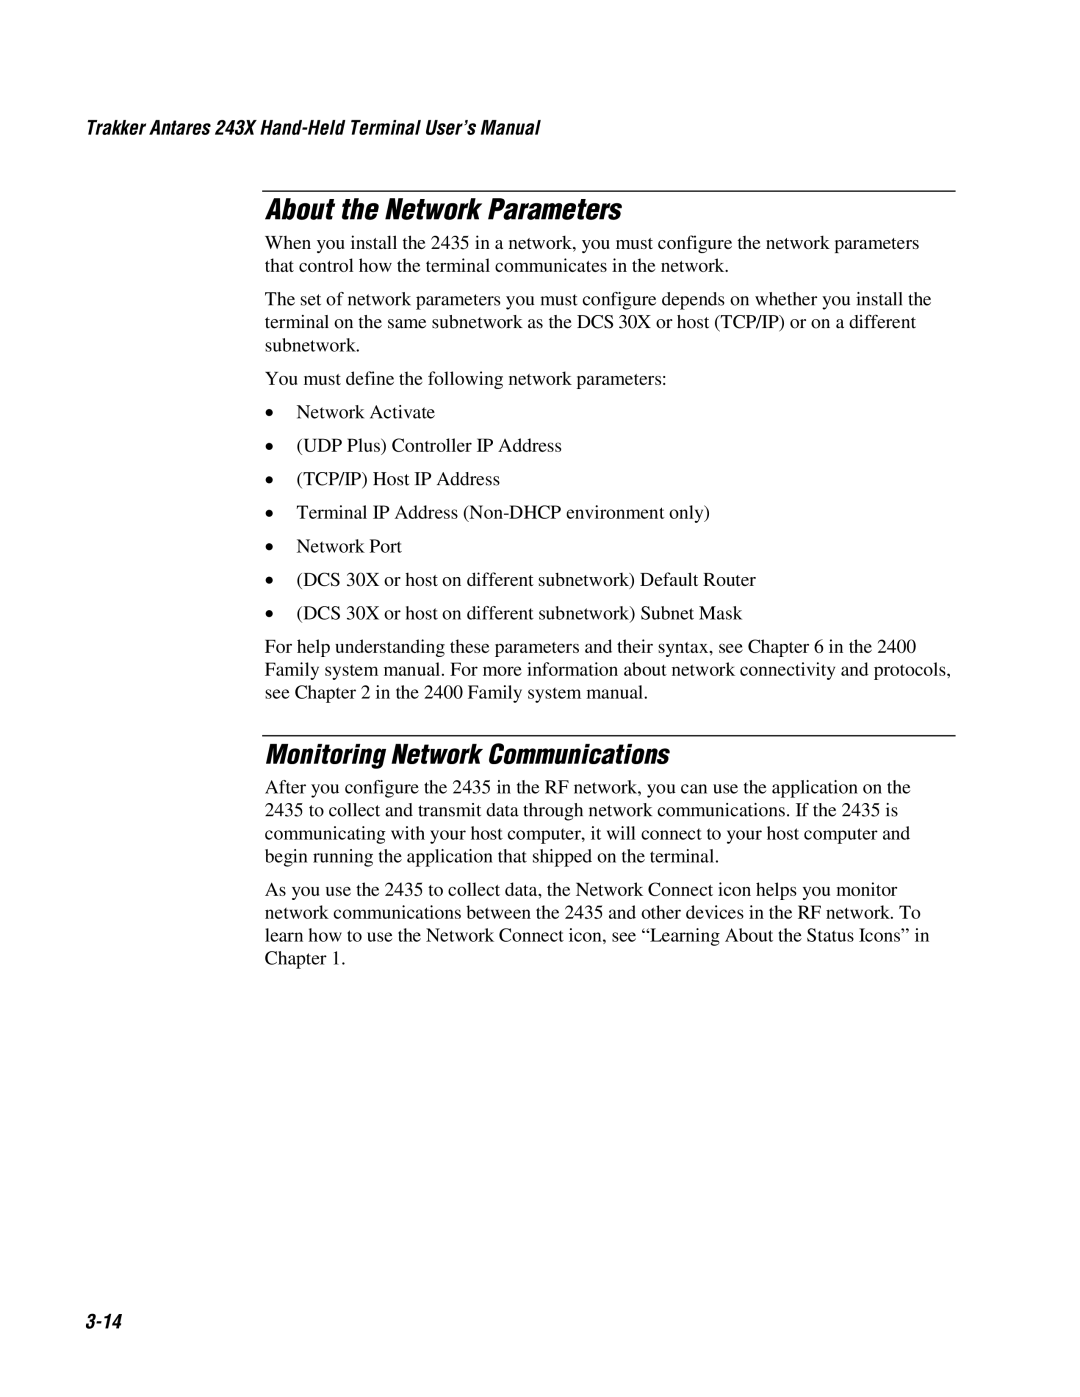 IBM 243X user manual About the Network Parameters, 3-14, Monitoring Network Communications 